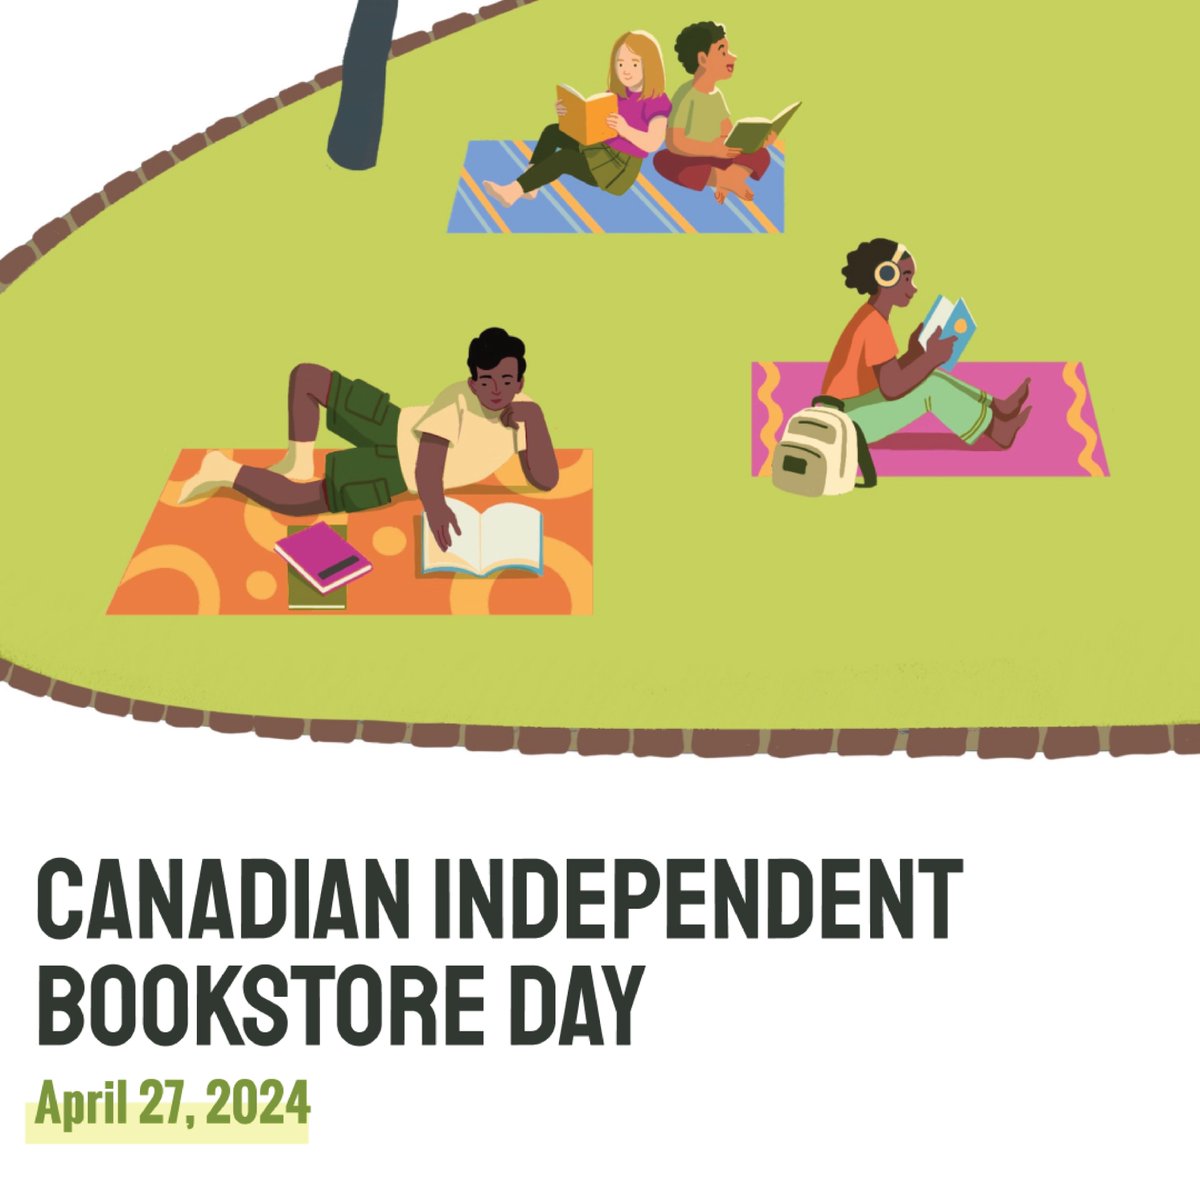 Today is Canadian Independent Bookstore Day! It’s the perfect excuse to buy a new book (or two) while supporting your favourite indie bookstores. indiebookstores.ca/cibd #CIBD2024 #CravingCanLit